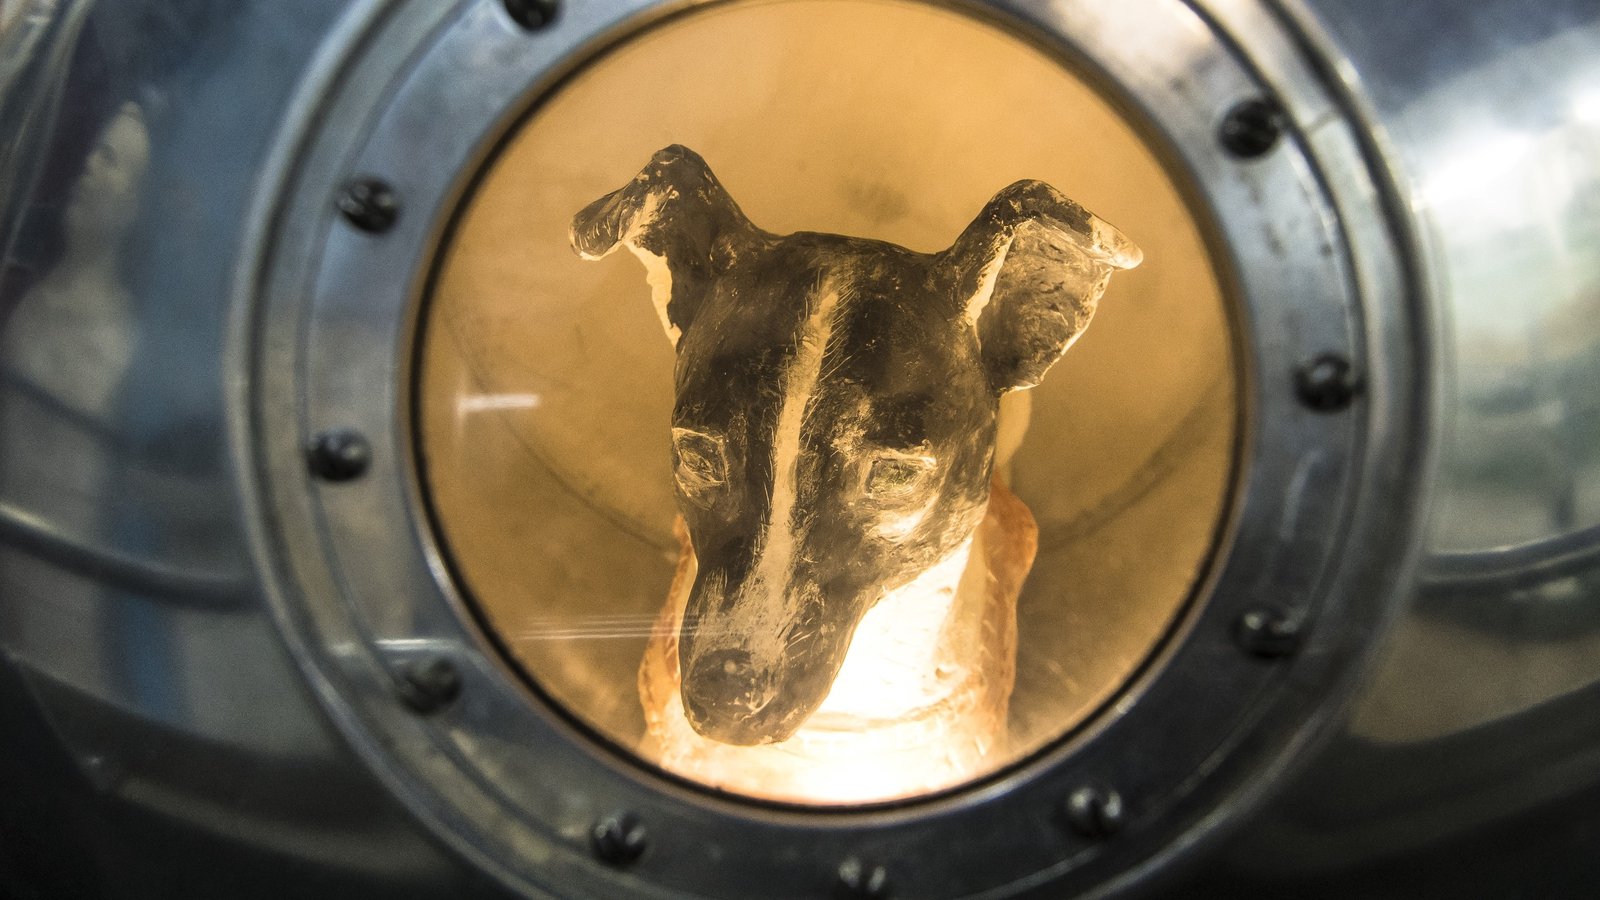 A short history of sending animals into space